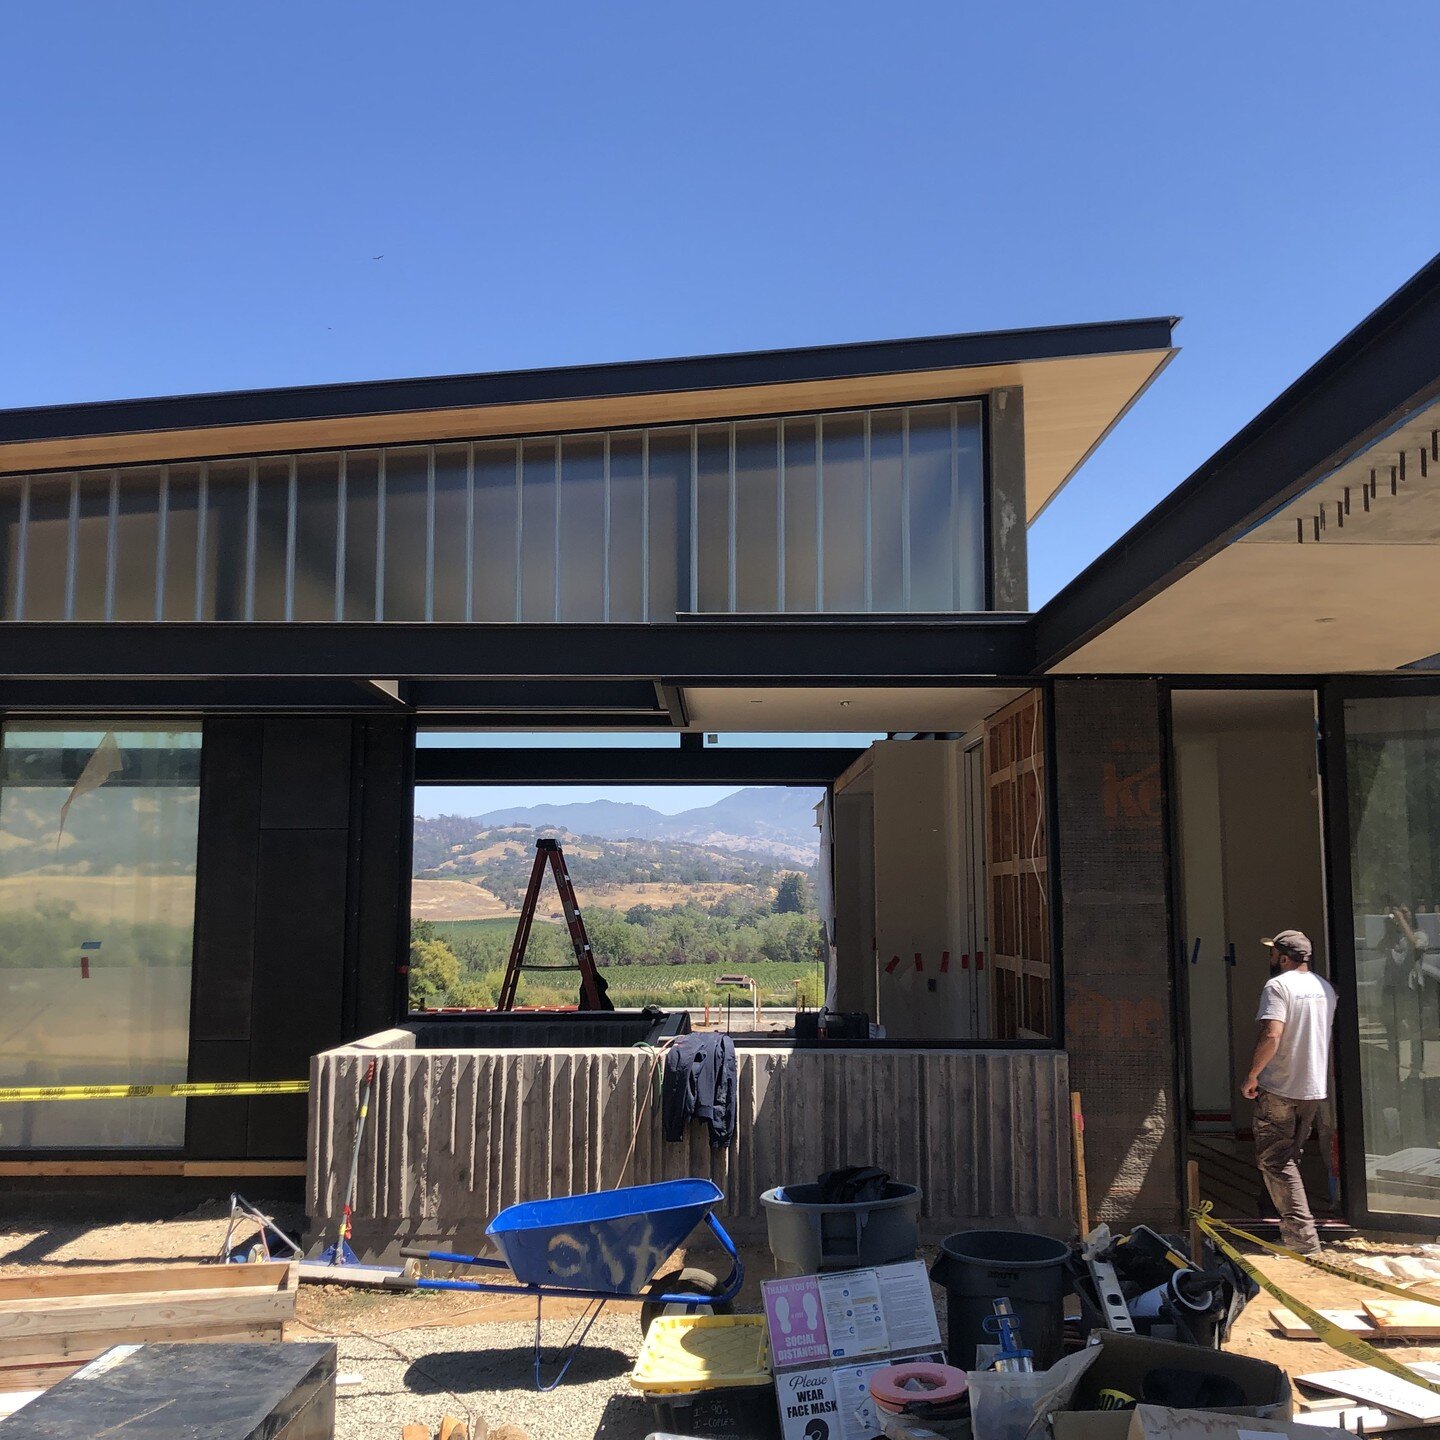 Progress shots from a new project in Healdsburg, with a perfectly framed view of Mt. St. Helena in the distance.